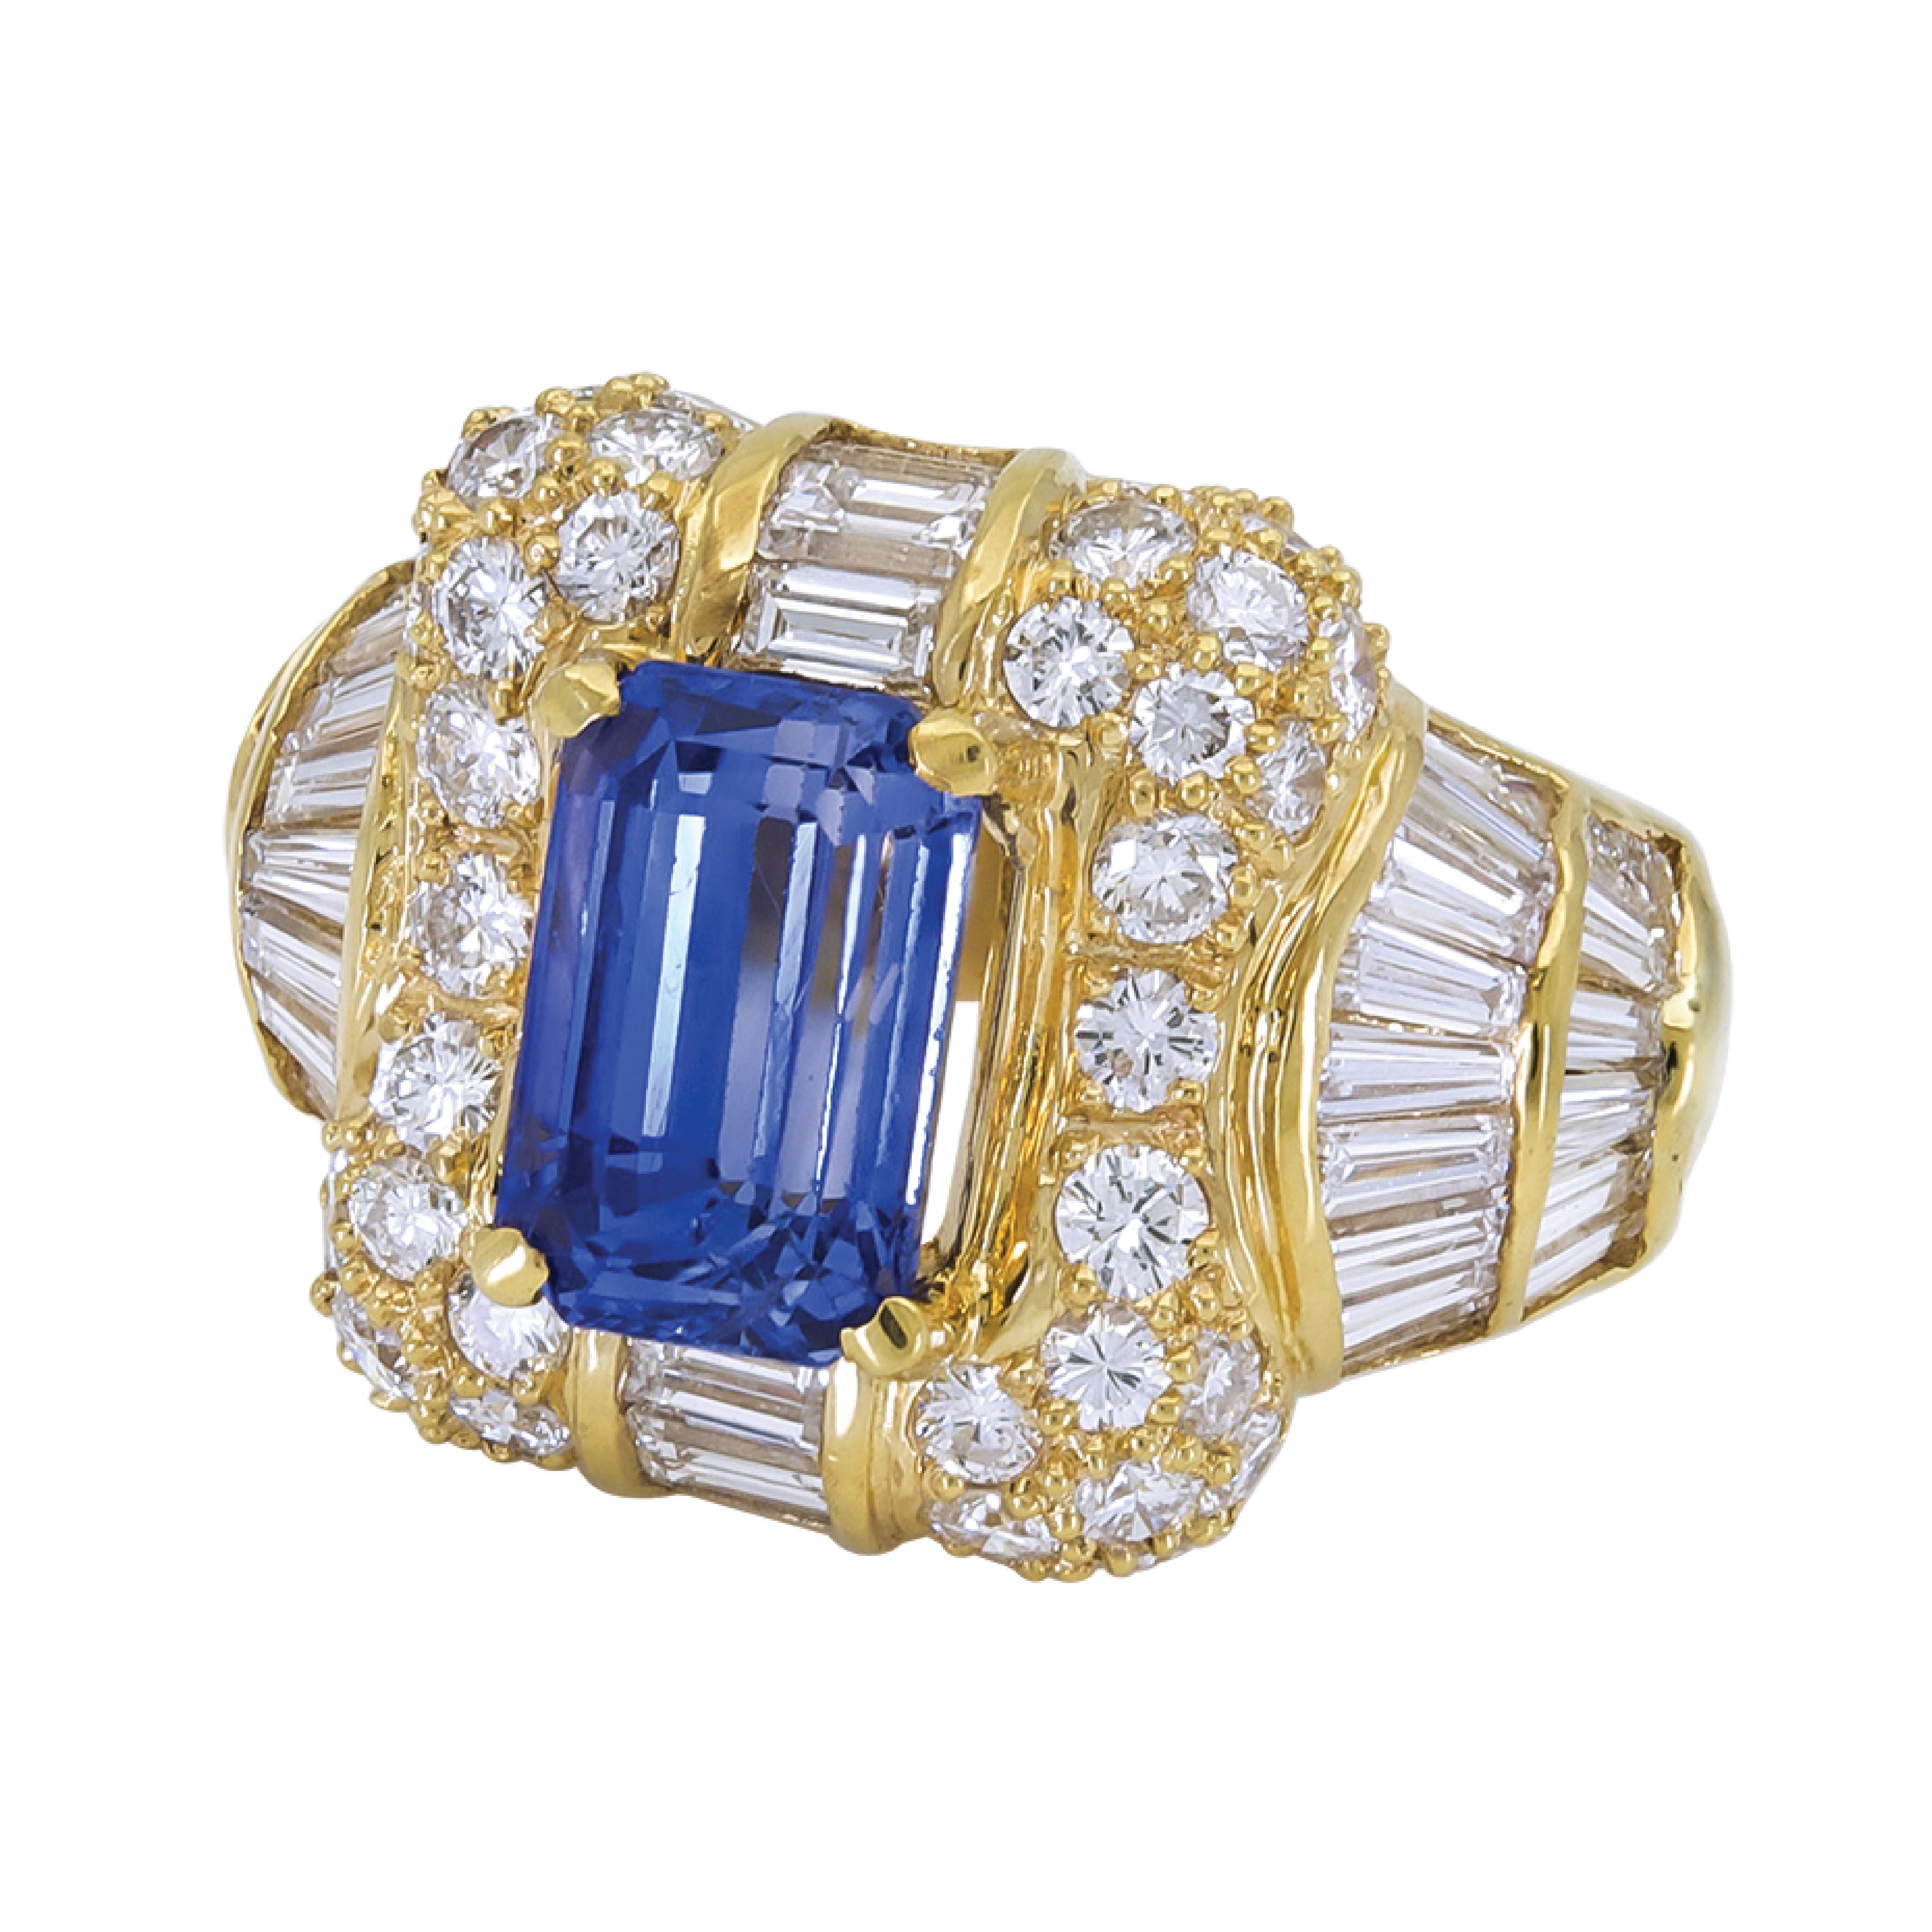 Sophia D. Emerald Cut Blue Sapphire center stone that weighs approximately 4.00 carats and surrounded by 3.20 carats total weight of diamonds dome ring set in 18 Karat Yellow Gold.

Sophia D by Joseph Dardashti LTD has been known worldwide for 35